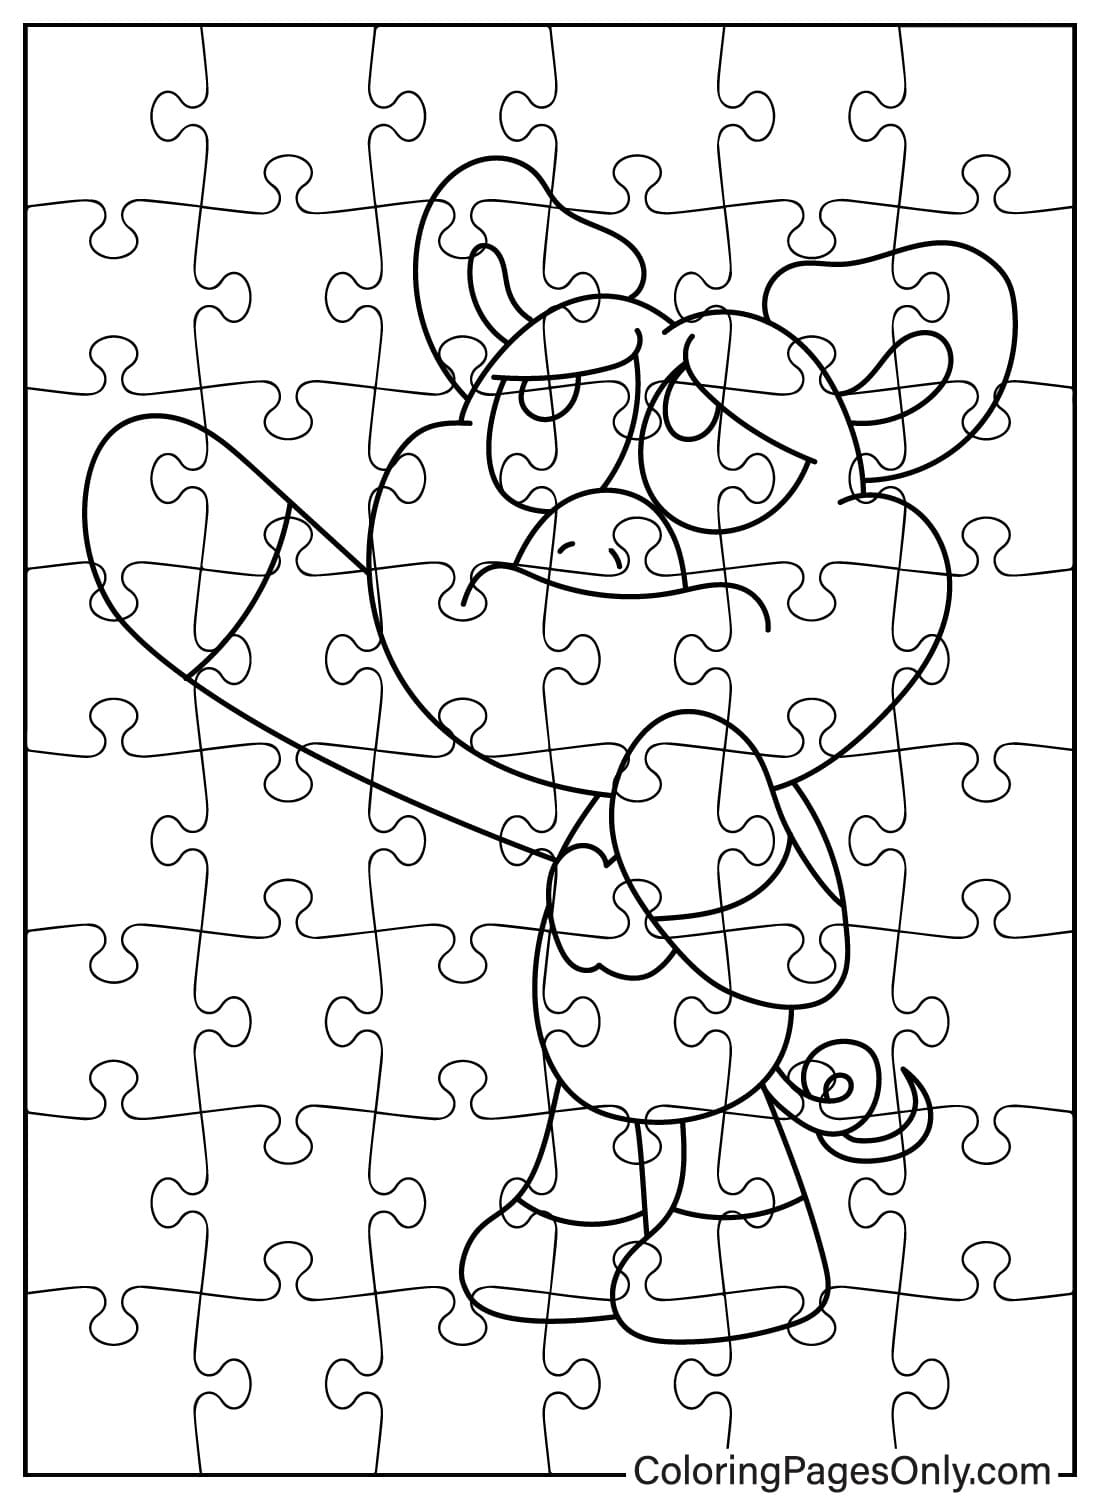 Jigsaw Puzzle PickyPiggy Coloring Page from PickyPiggy